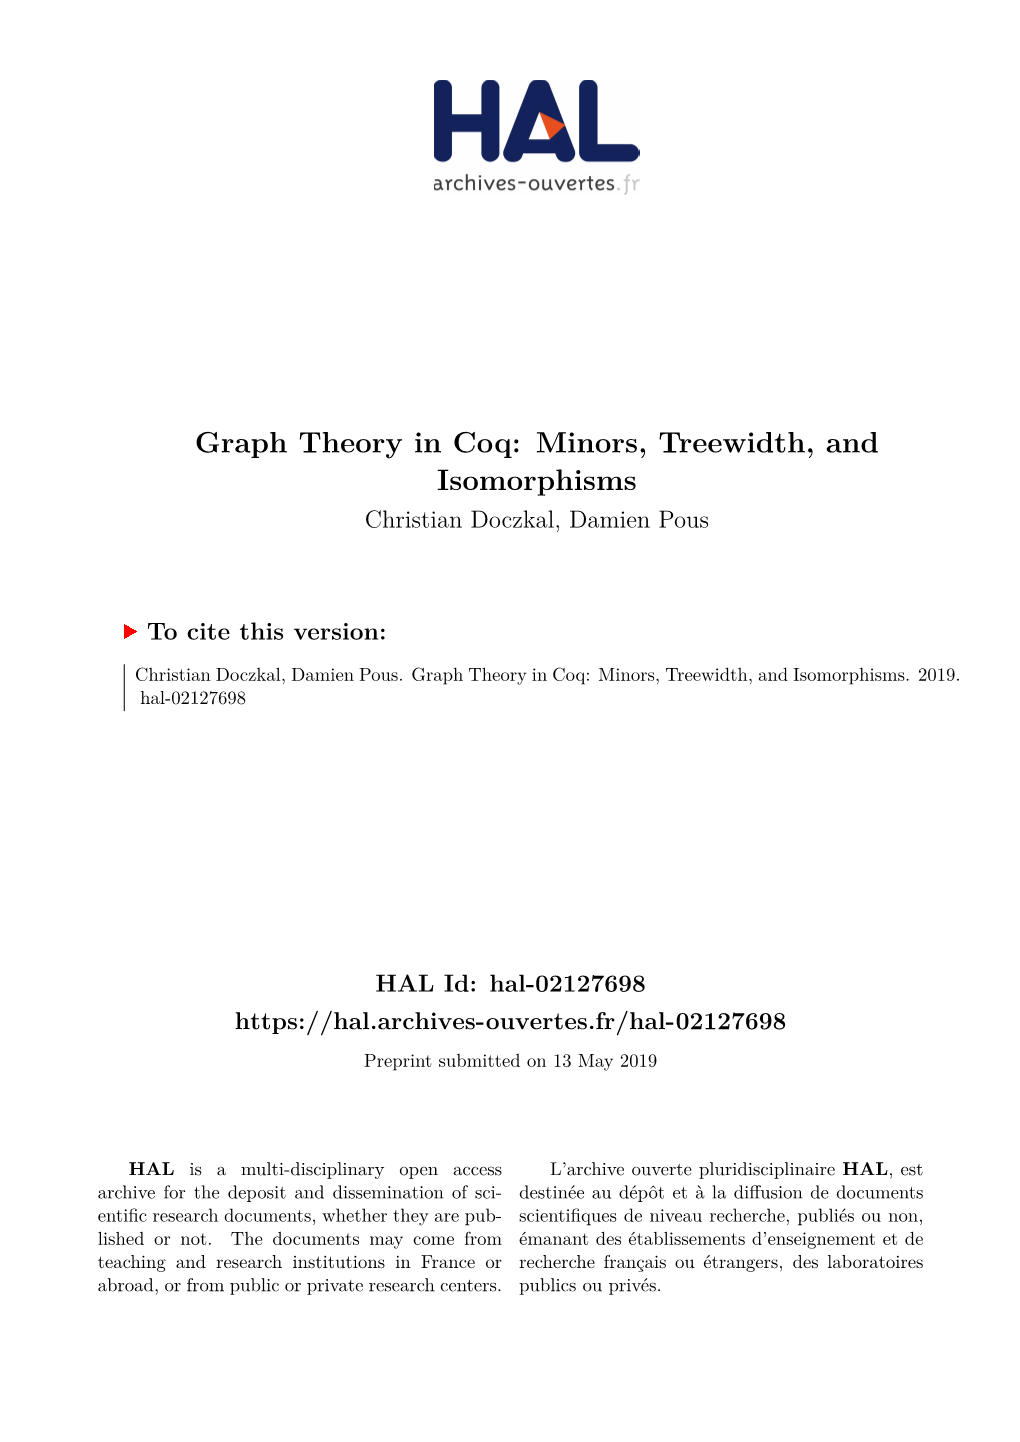 Graph Theory in Coq: Minors, Treewidth, and Isomorphisms Christian Doczkal, Damien Pous